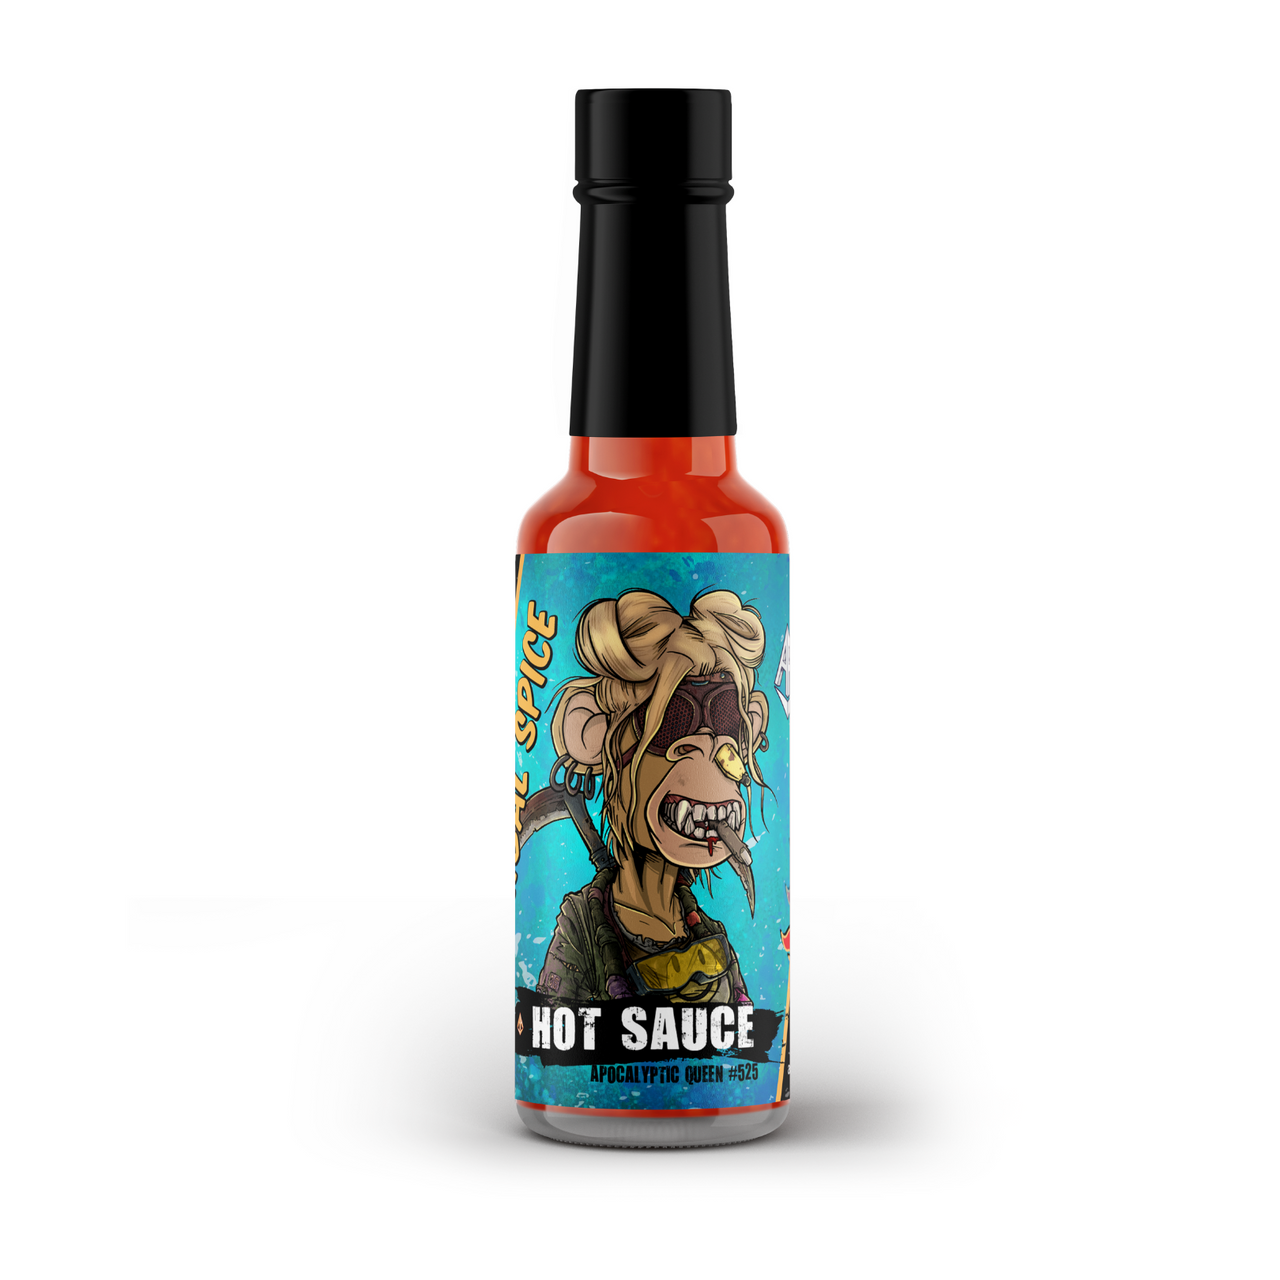 Apocalyptic Queen #525 Cannibal Spice Hot Sauce